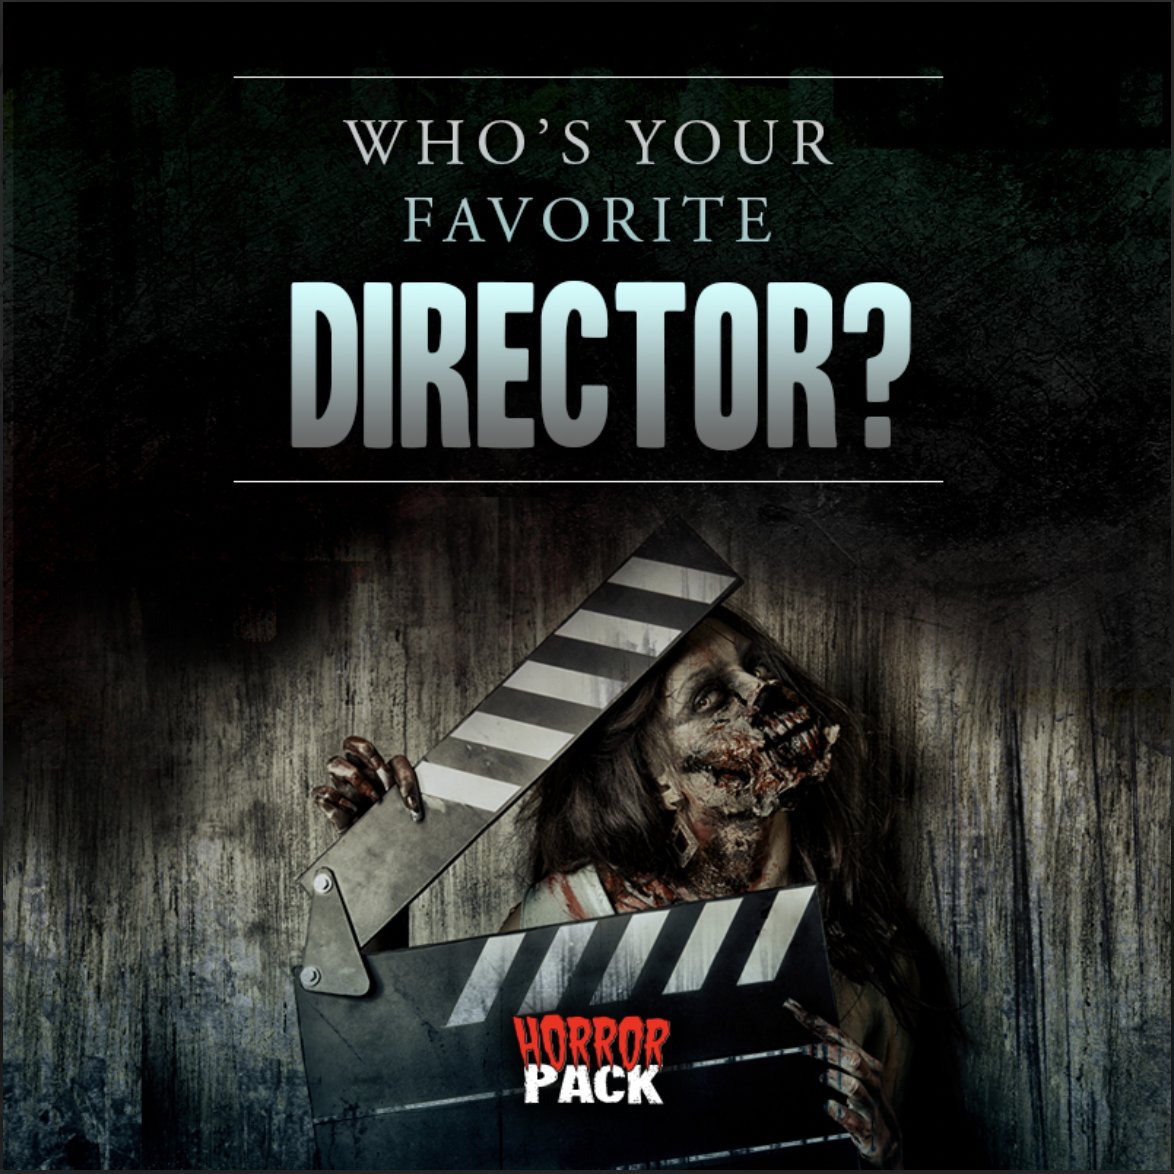 Who's your favorite director?